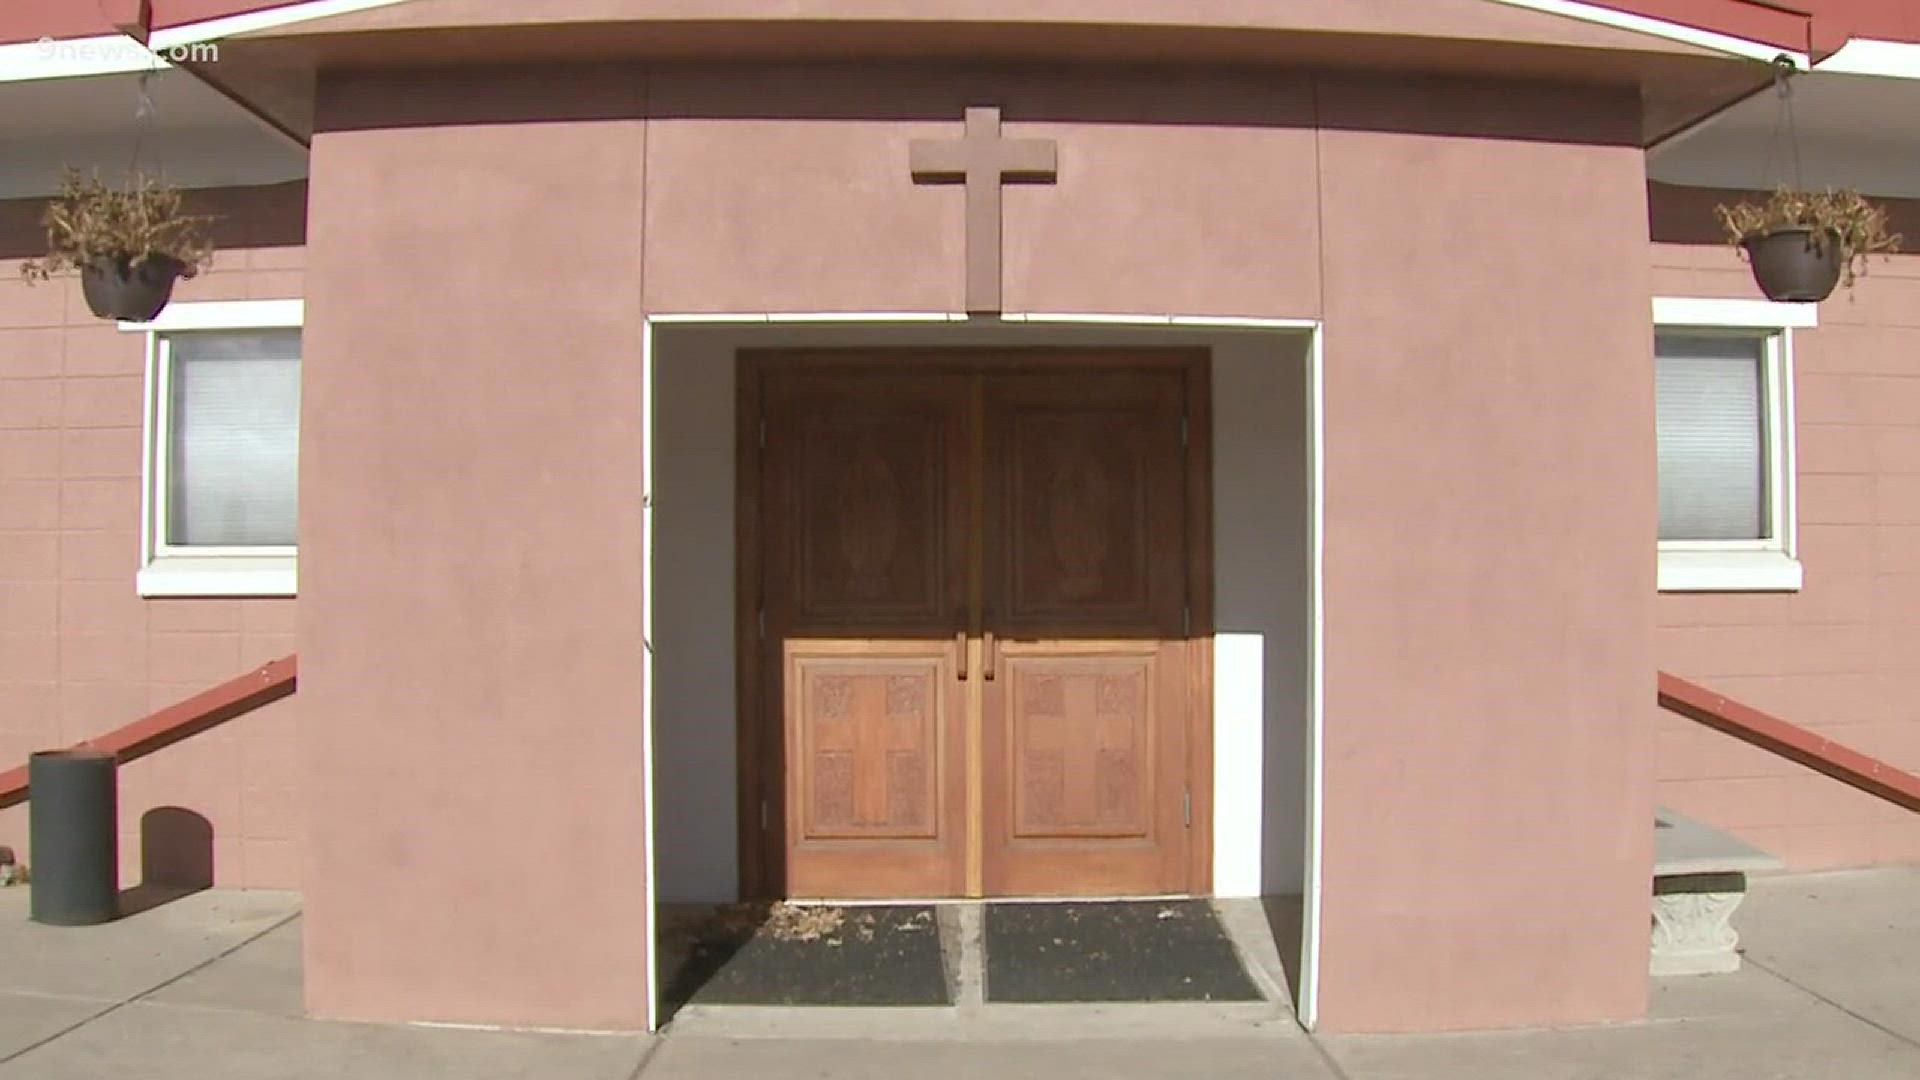 A year and a half ago the archdiocese of Denver announced a small church would no longer have mass because of a shortage of priests. Ever since, members of the "Our Lady of Visitation" have fought to get their church back.